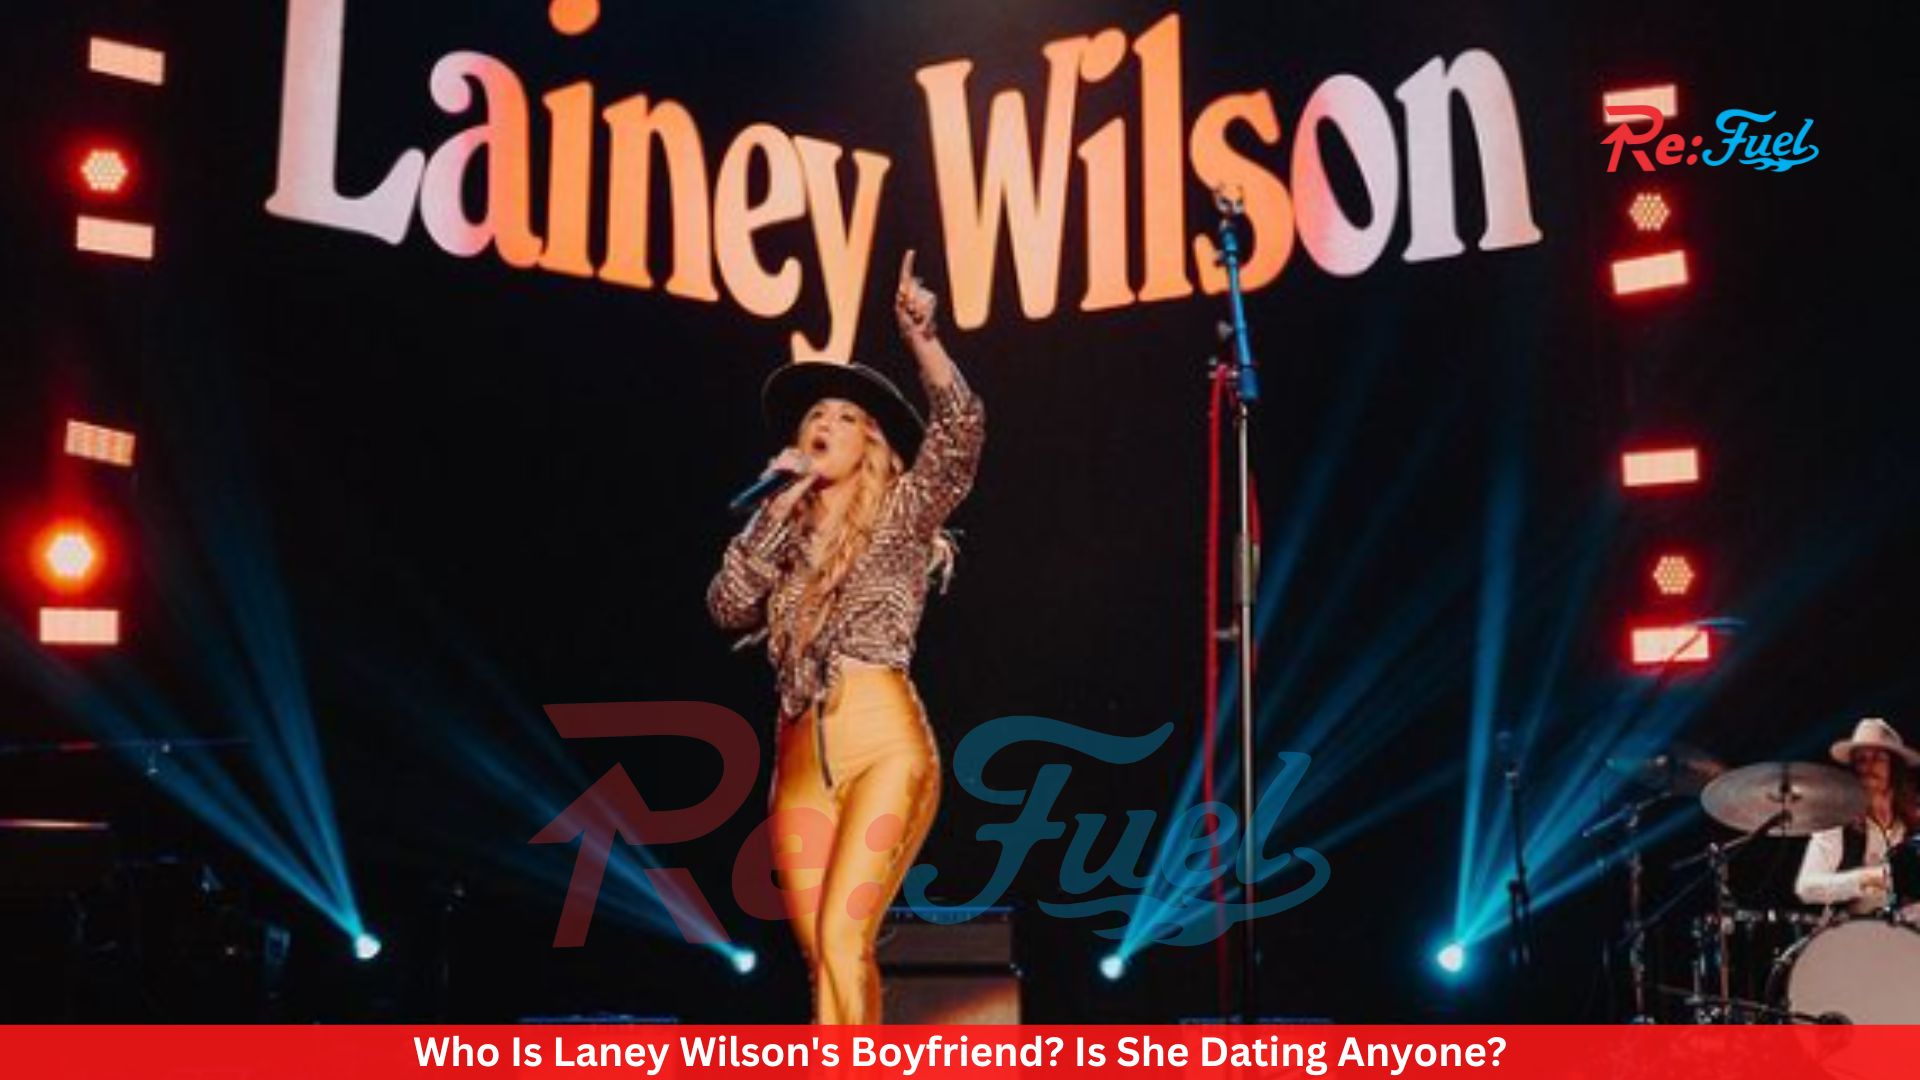 Who Is Laney Wilson's Boyfriend? Is She Dating Anyone?